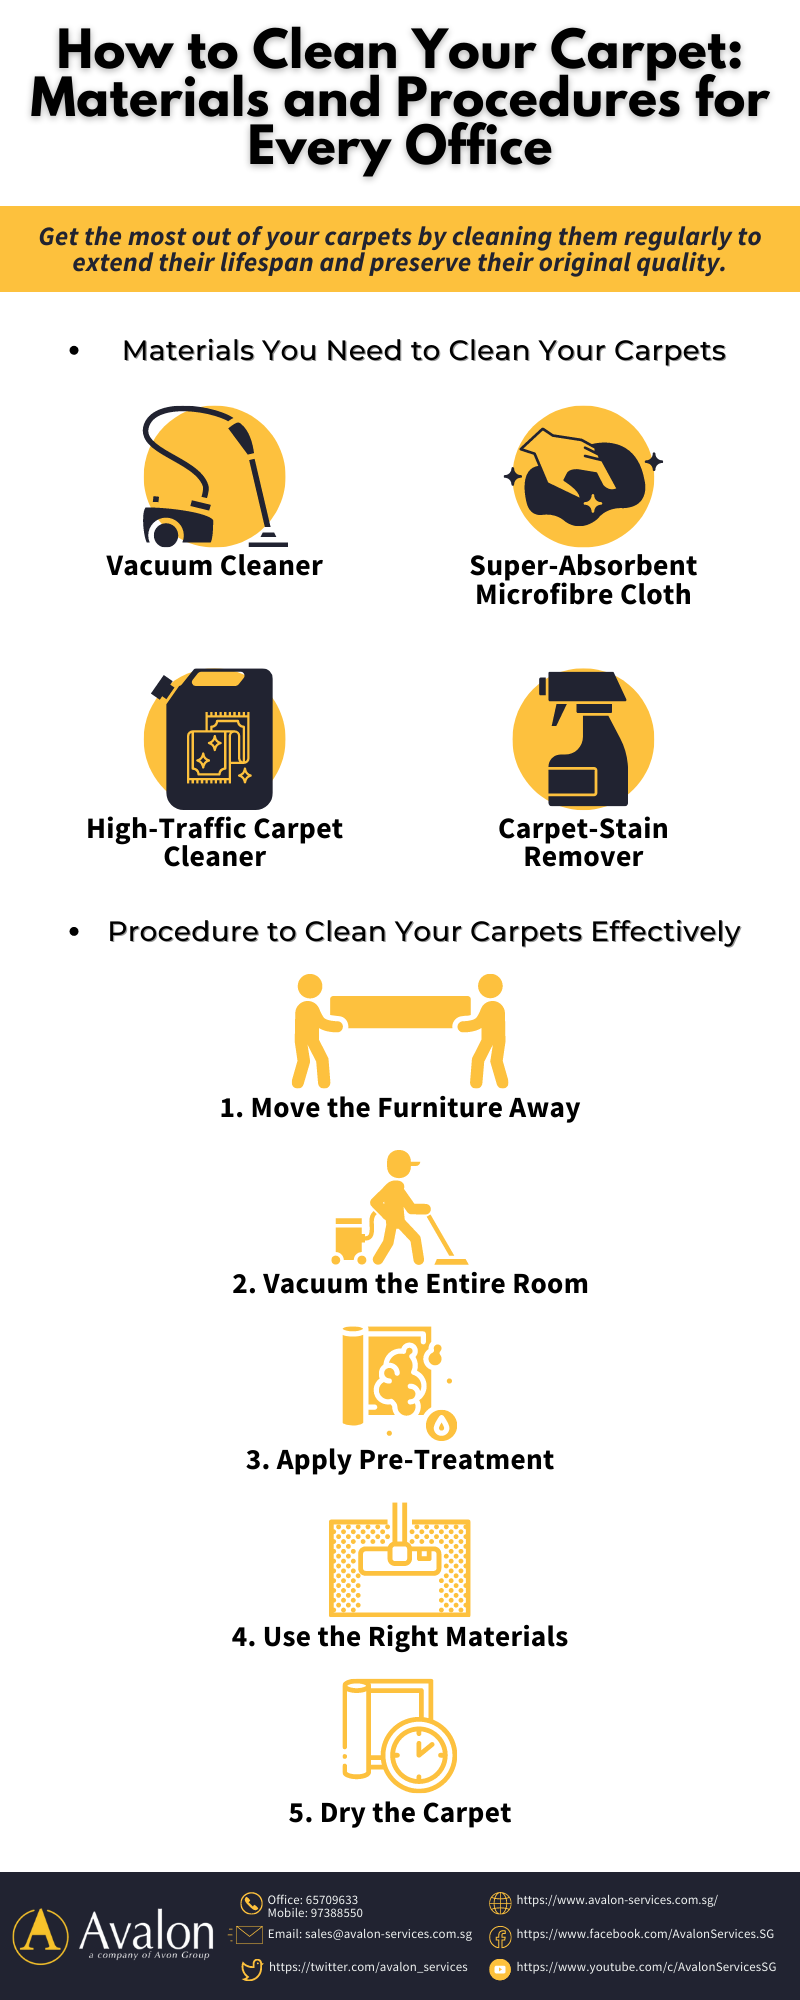 How to Clean Your Carpet: Materials and Procedures for Every Office